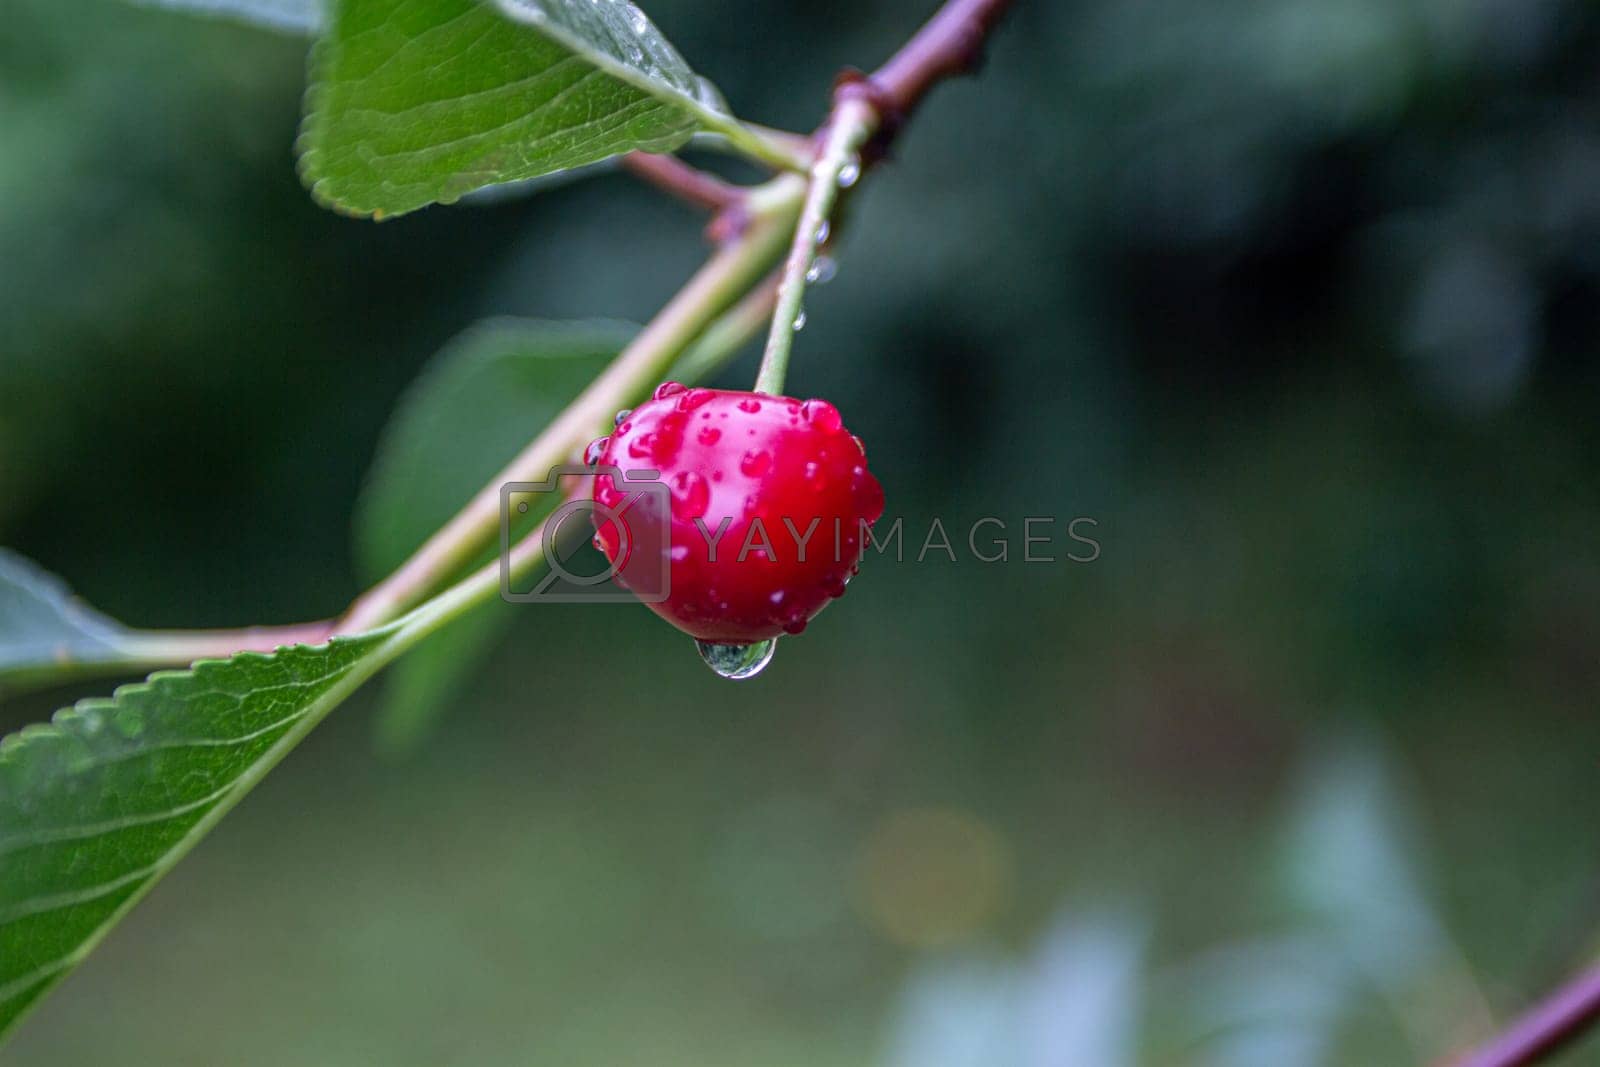 Royalty free image of red cherry berry branch with water droplets. by electrovenik